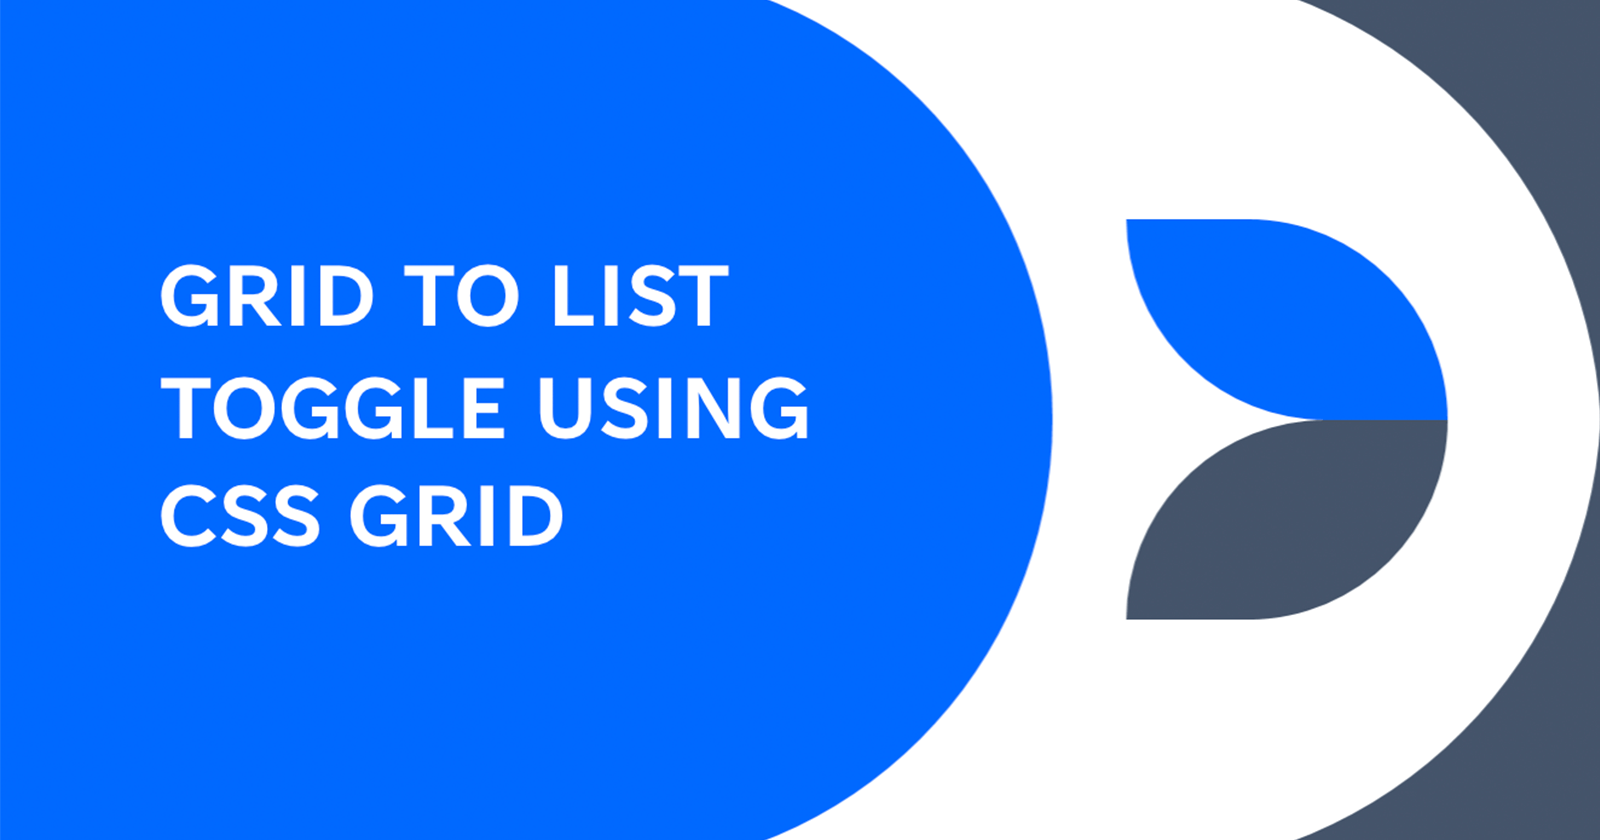 Grid to list toggle using CSS Grid